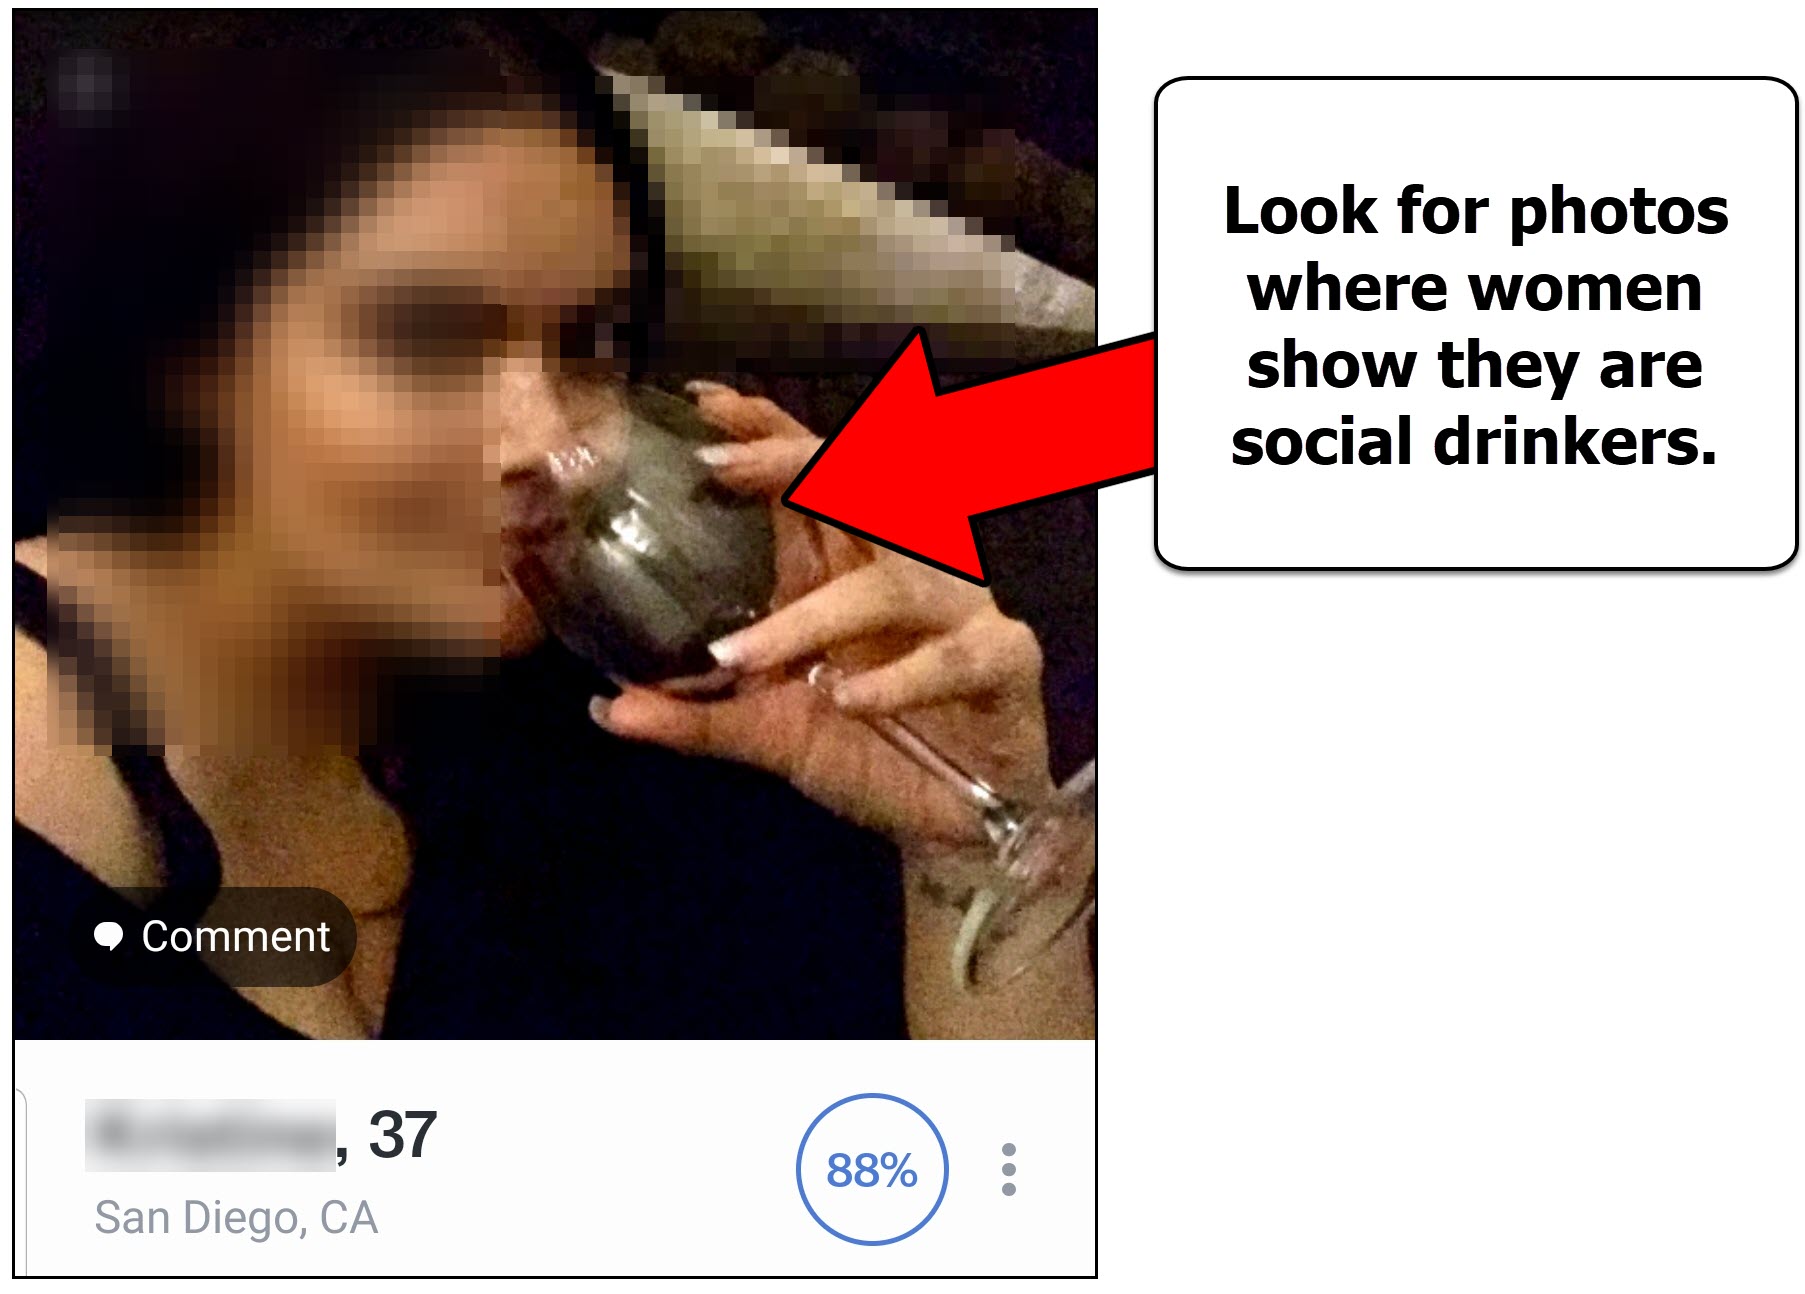 Use photos to find conversation starters you can use with women